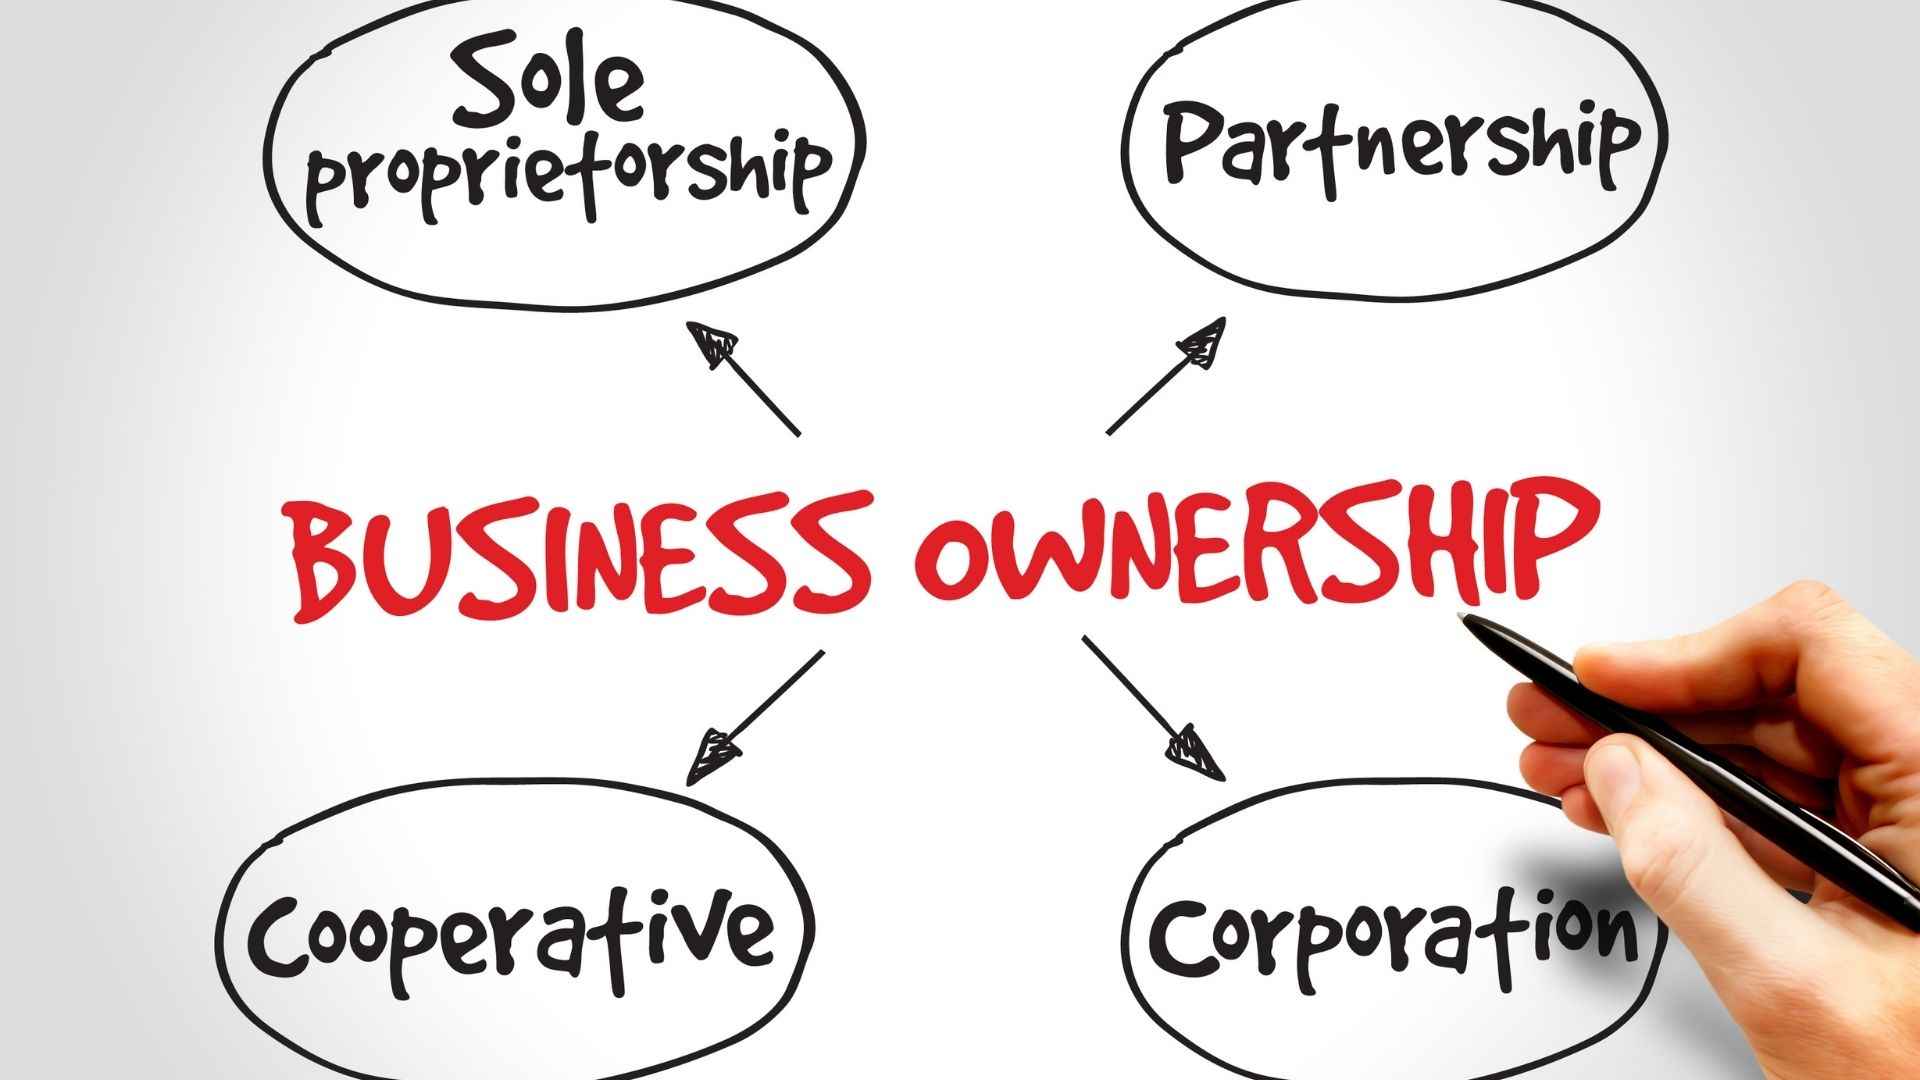 Types of Business Ownership for a Growing Small Business